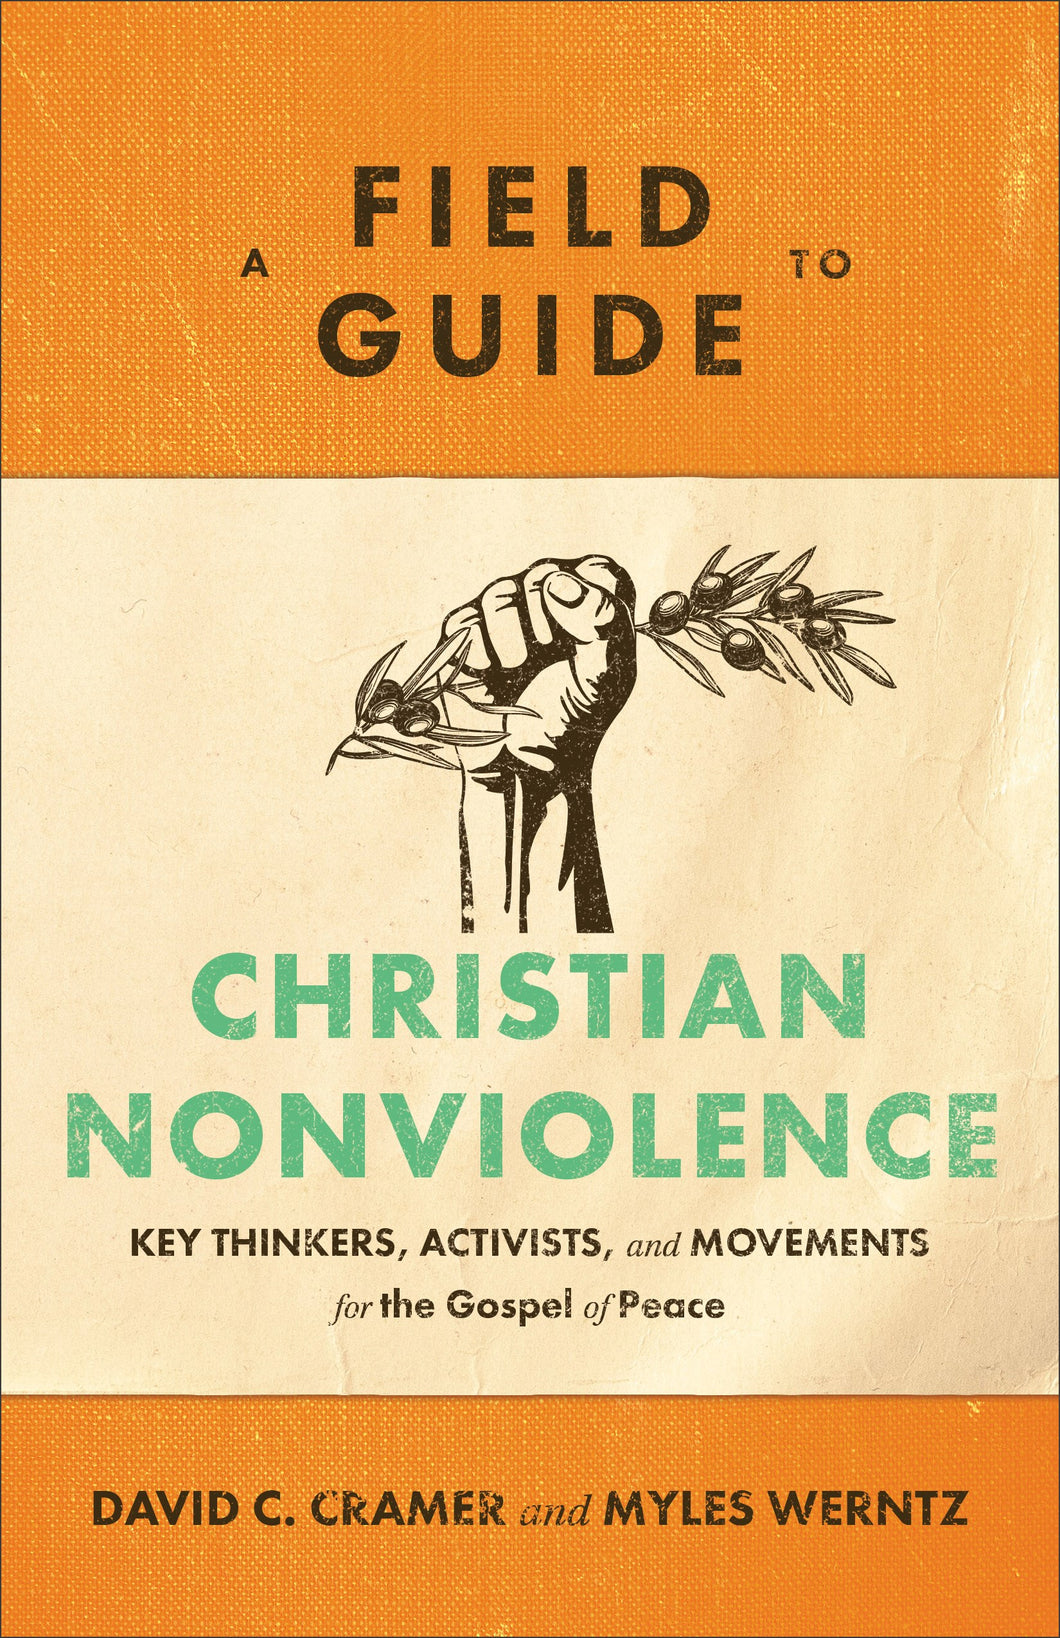 A Field Guide To Christian Nonviolence